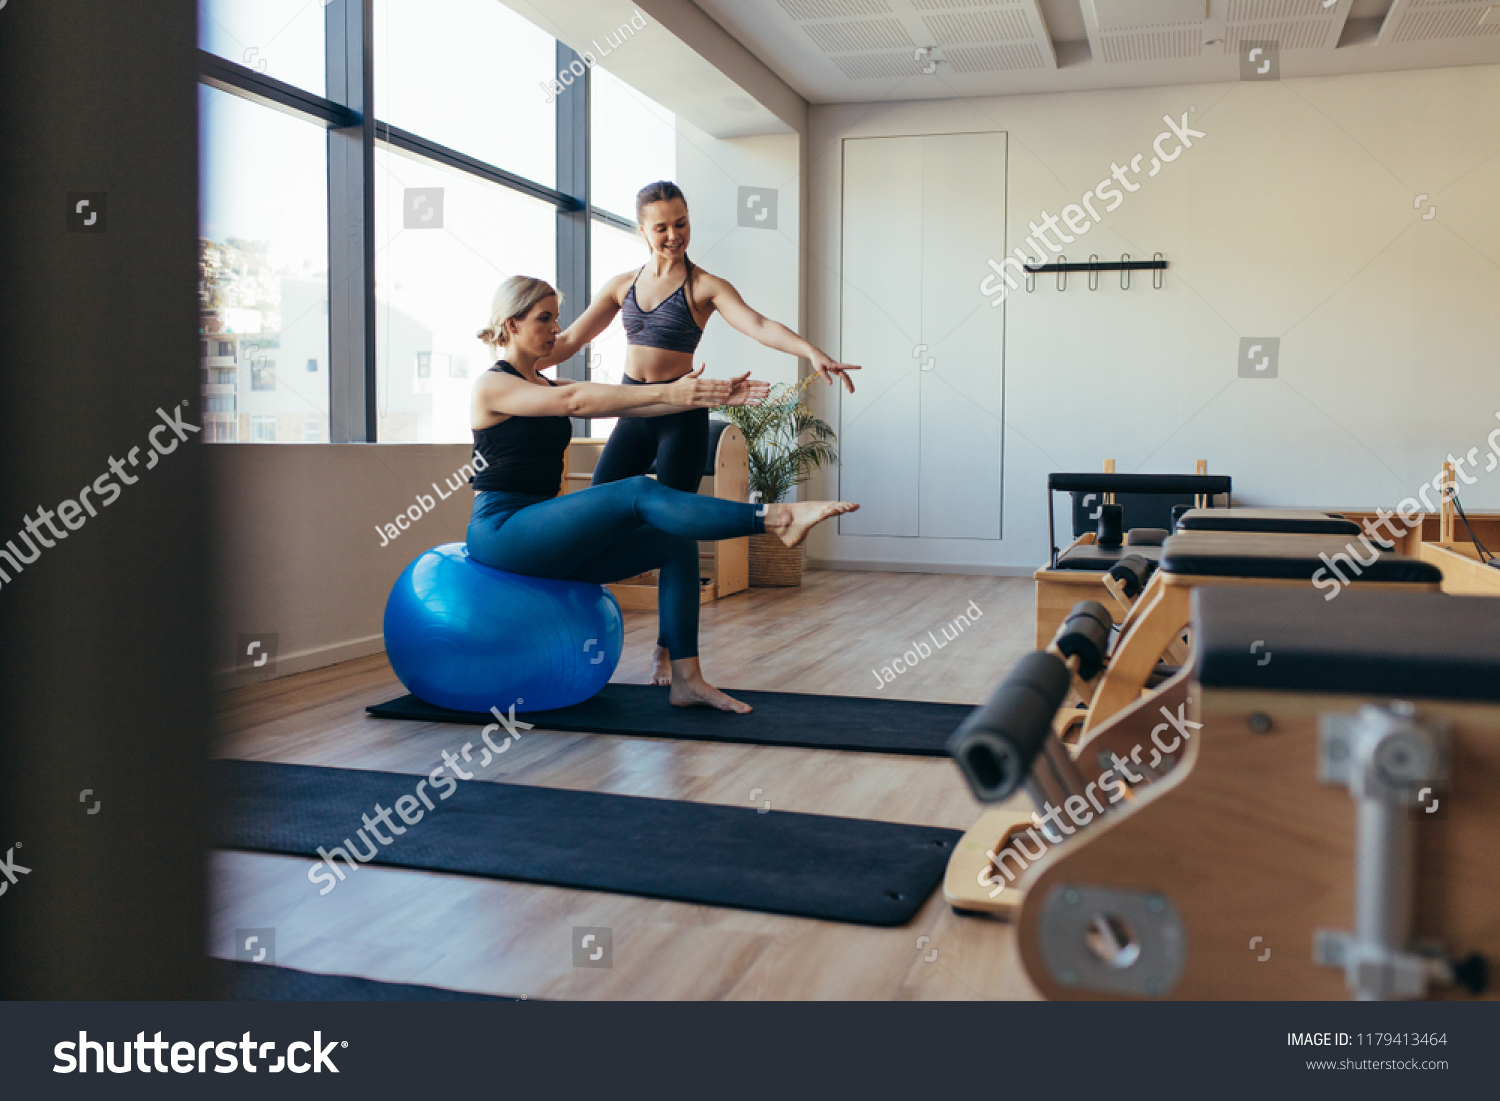 Female pilates instructor training a woman in pilates workout. Woman doing pilates workout sitting on a fitness ball in a gym. #1179413464